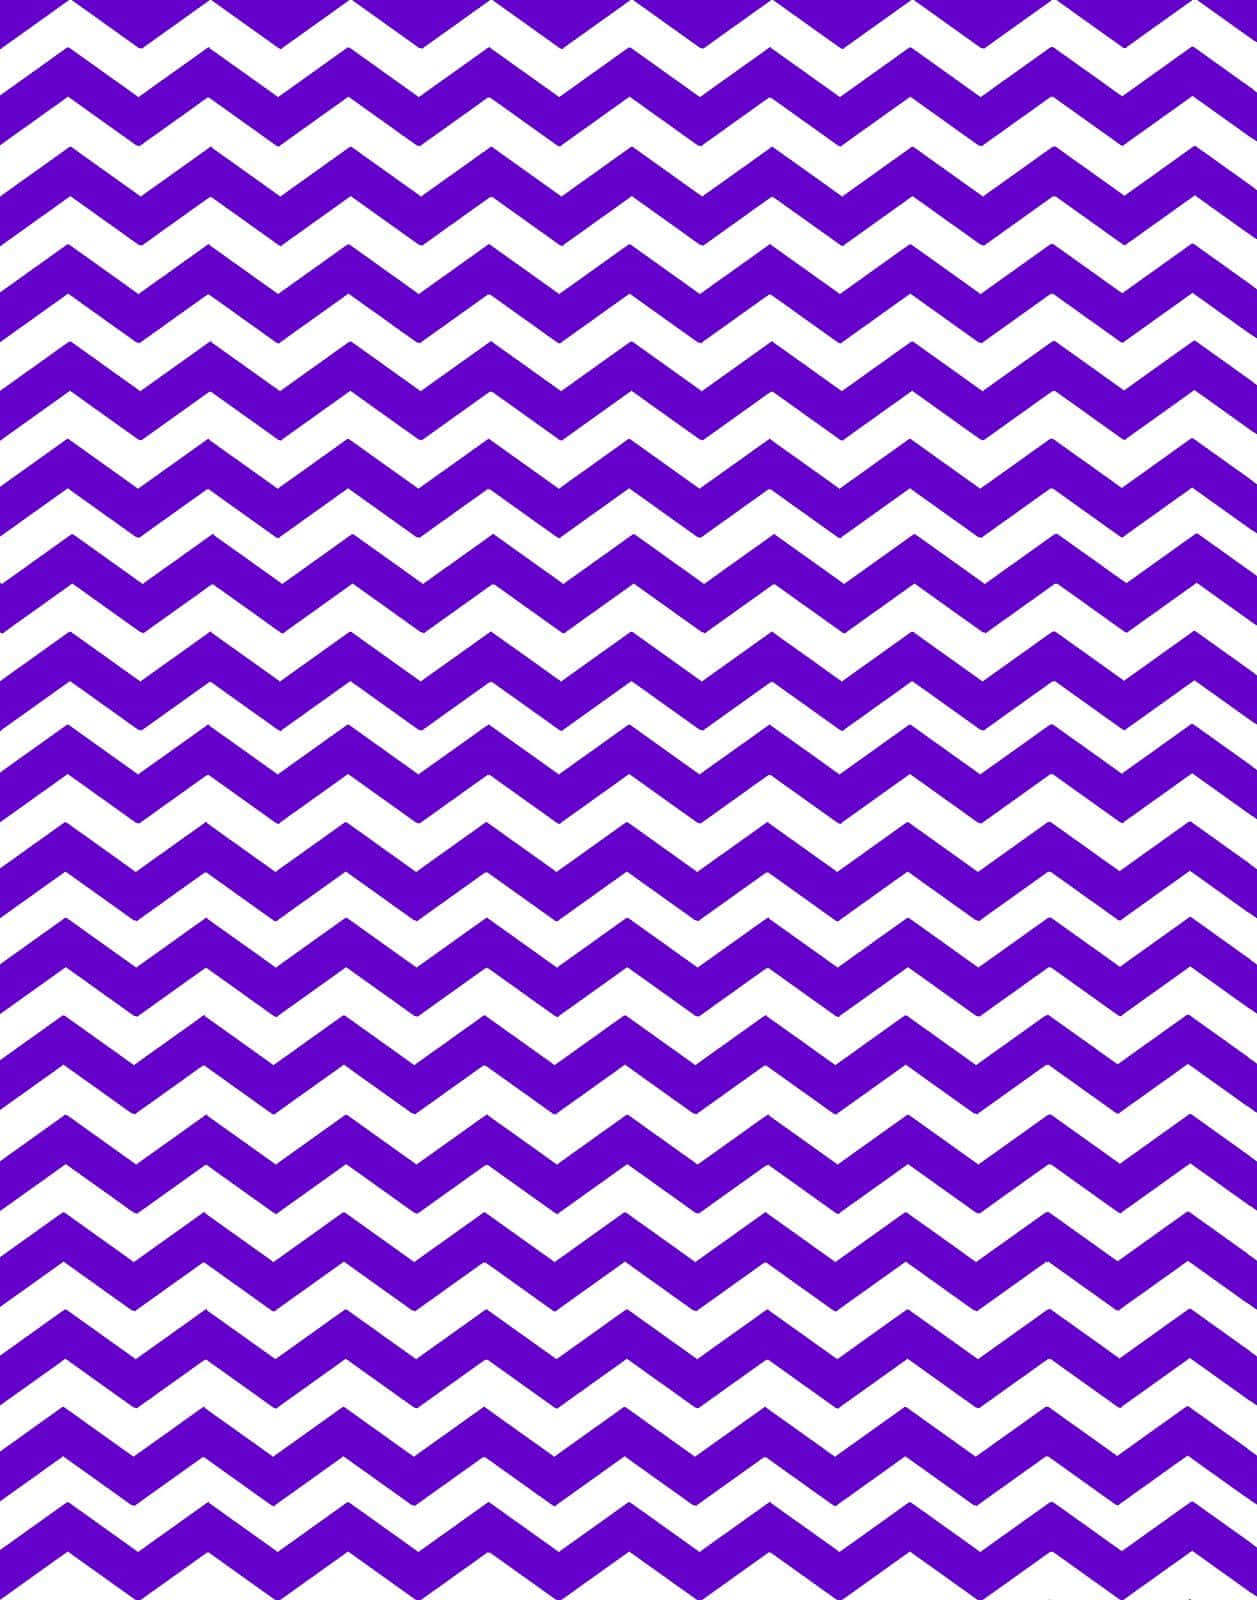 Adorable Chevron Pattern for a Stylish Background Wallpaper